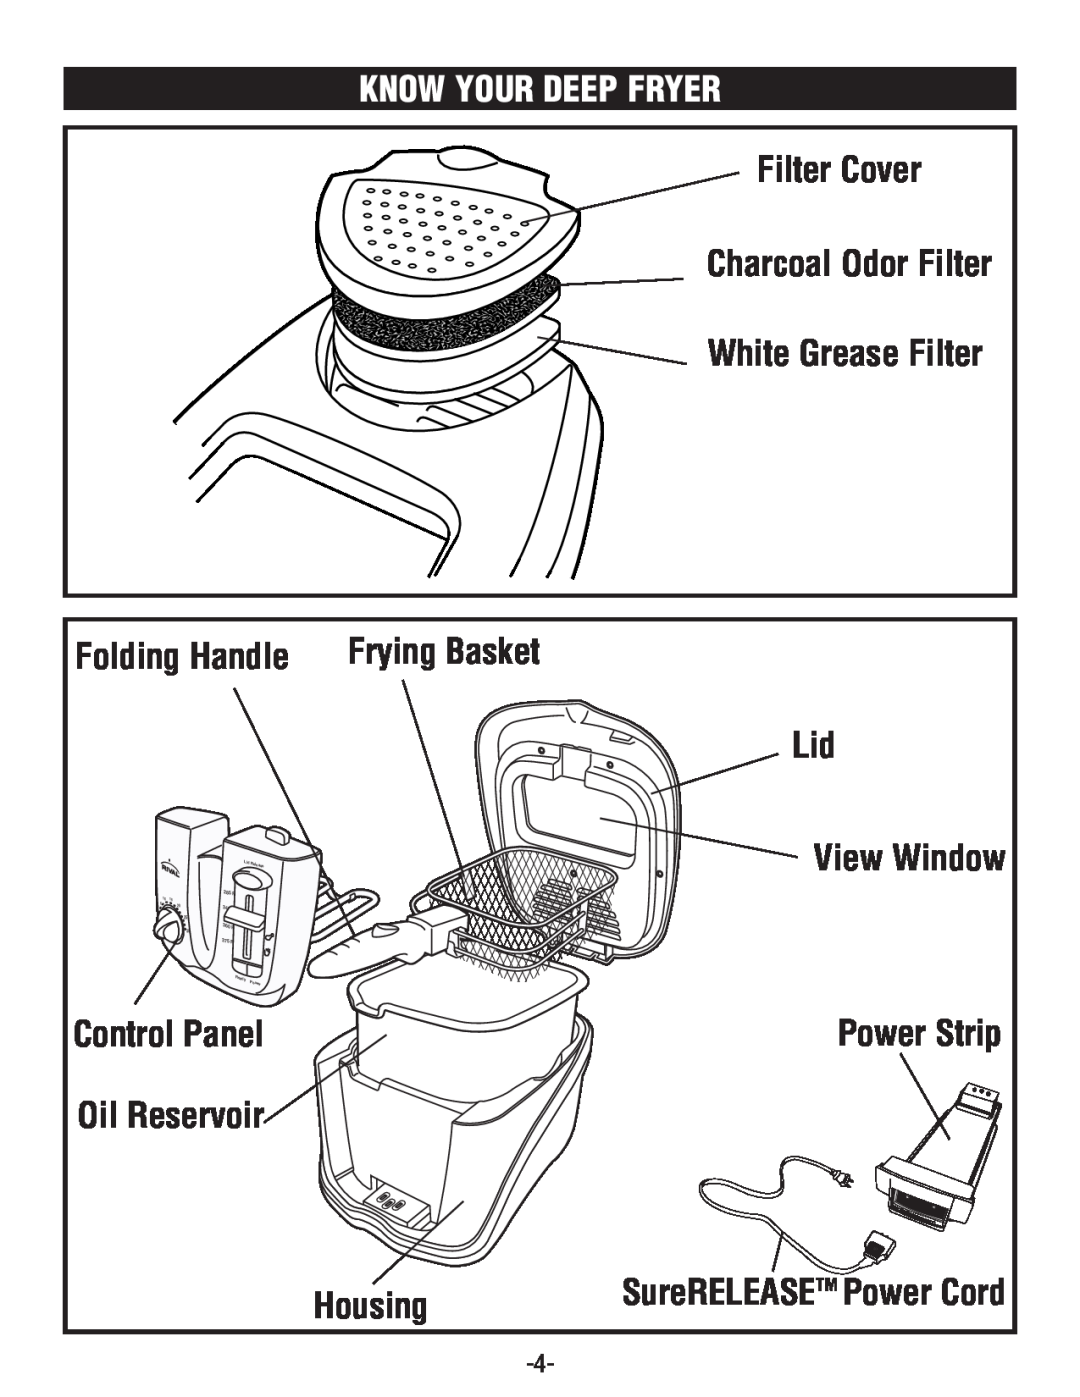 Rival CZF630 Know Your Deep Fryer, Filter Cover Charcoal Odor Filter, White Grease Filter, Folding Handle, Frying Basket 